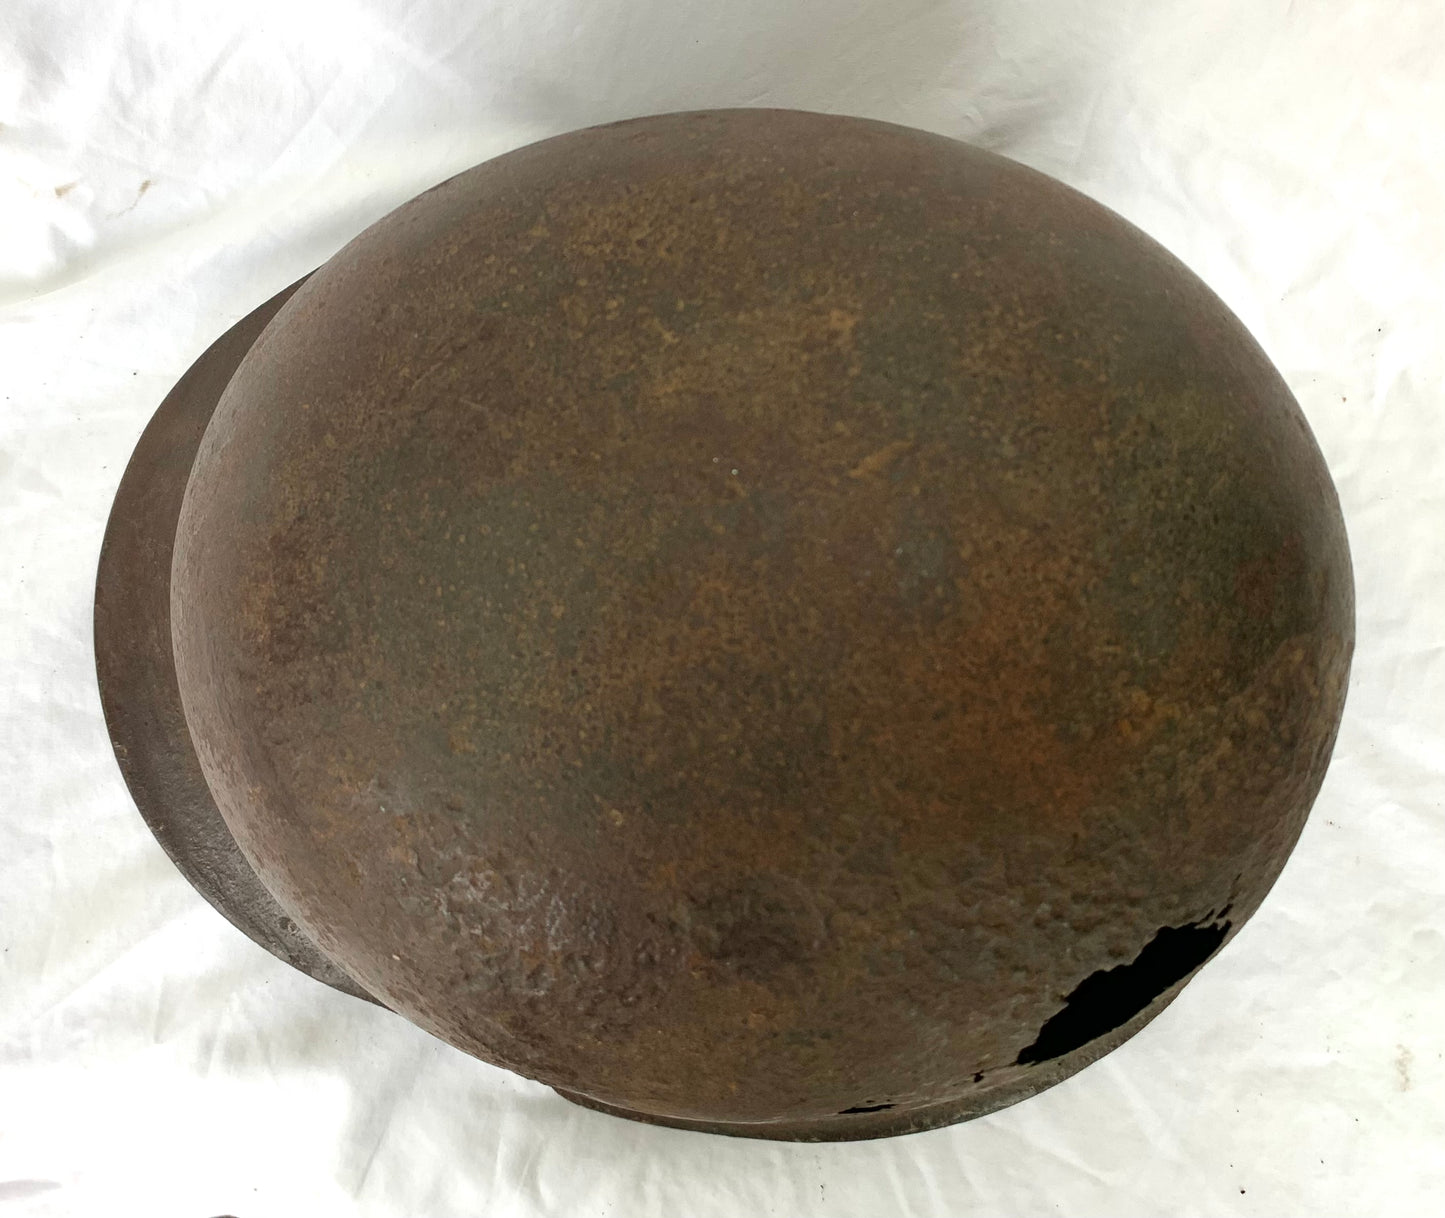 WW2 German M42 single decal Battle Damaged Helmet with Liner recovered from the Eastern Front